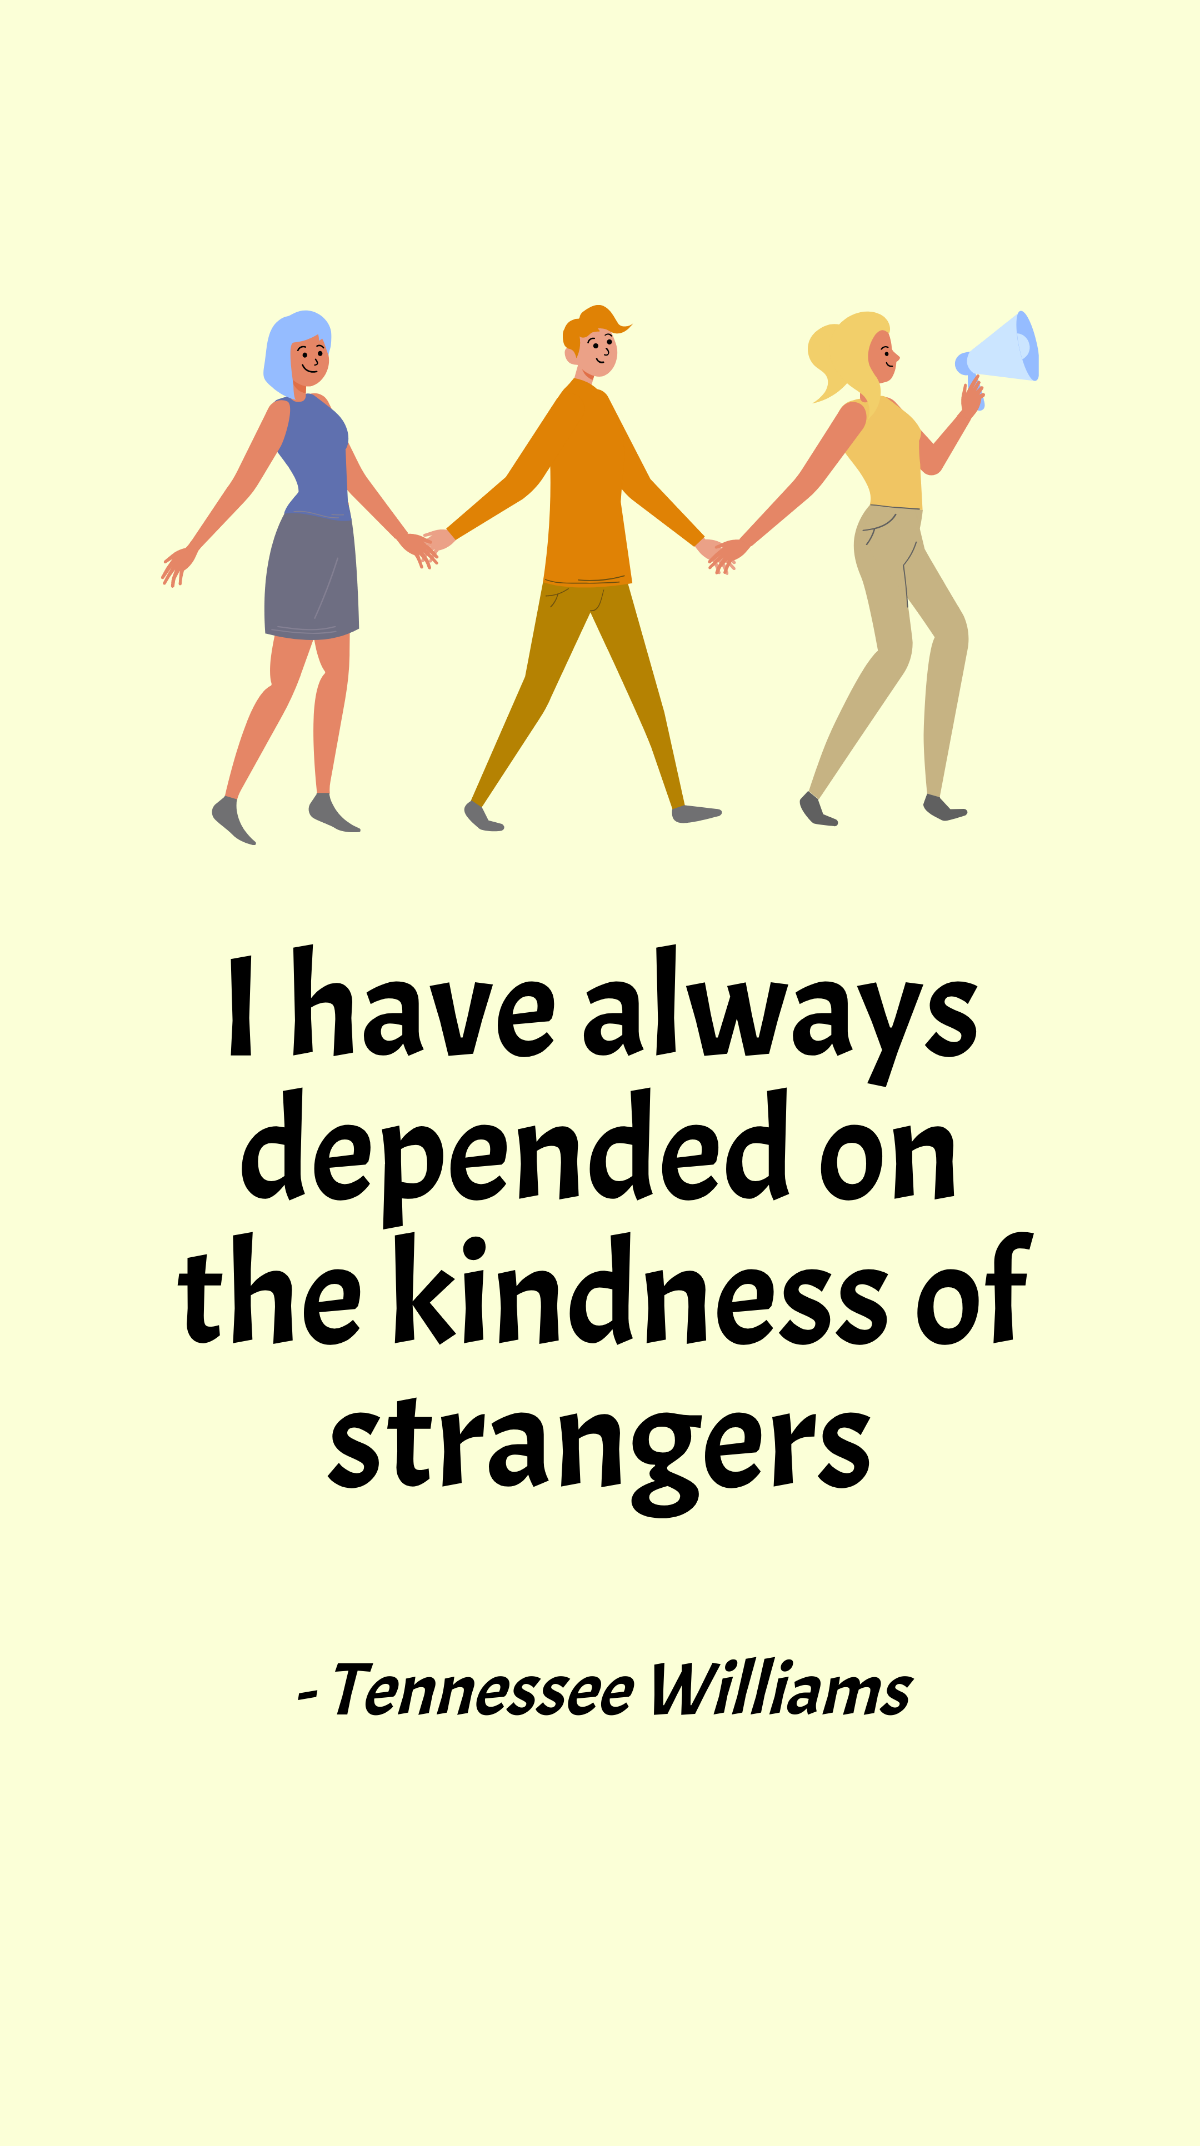 Free Tennessee Williams - I have always depended on the kindness of strangers Template